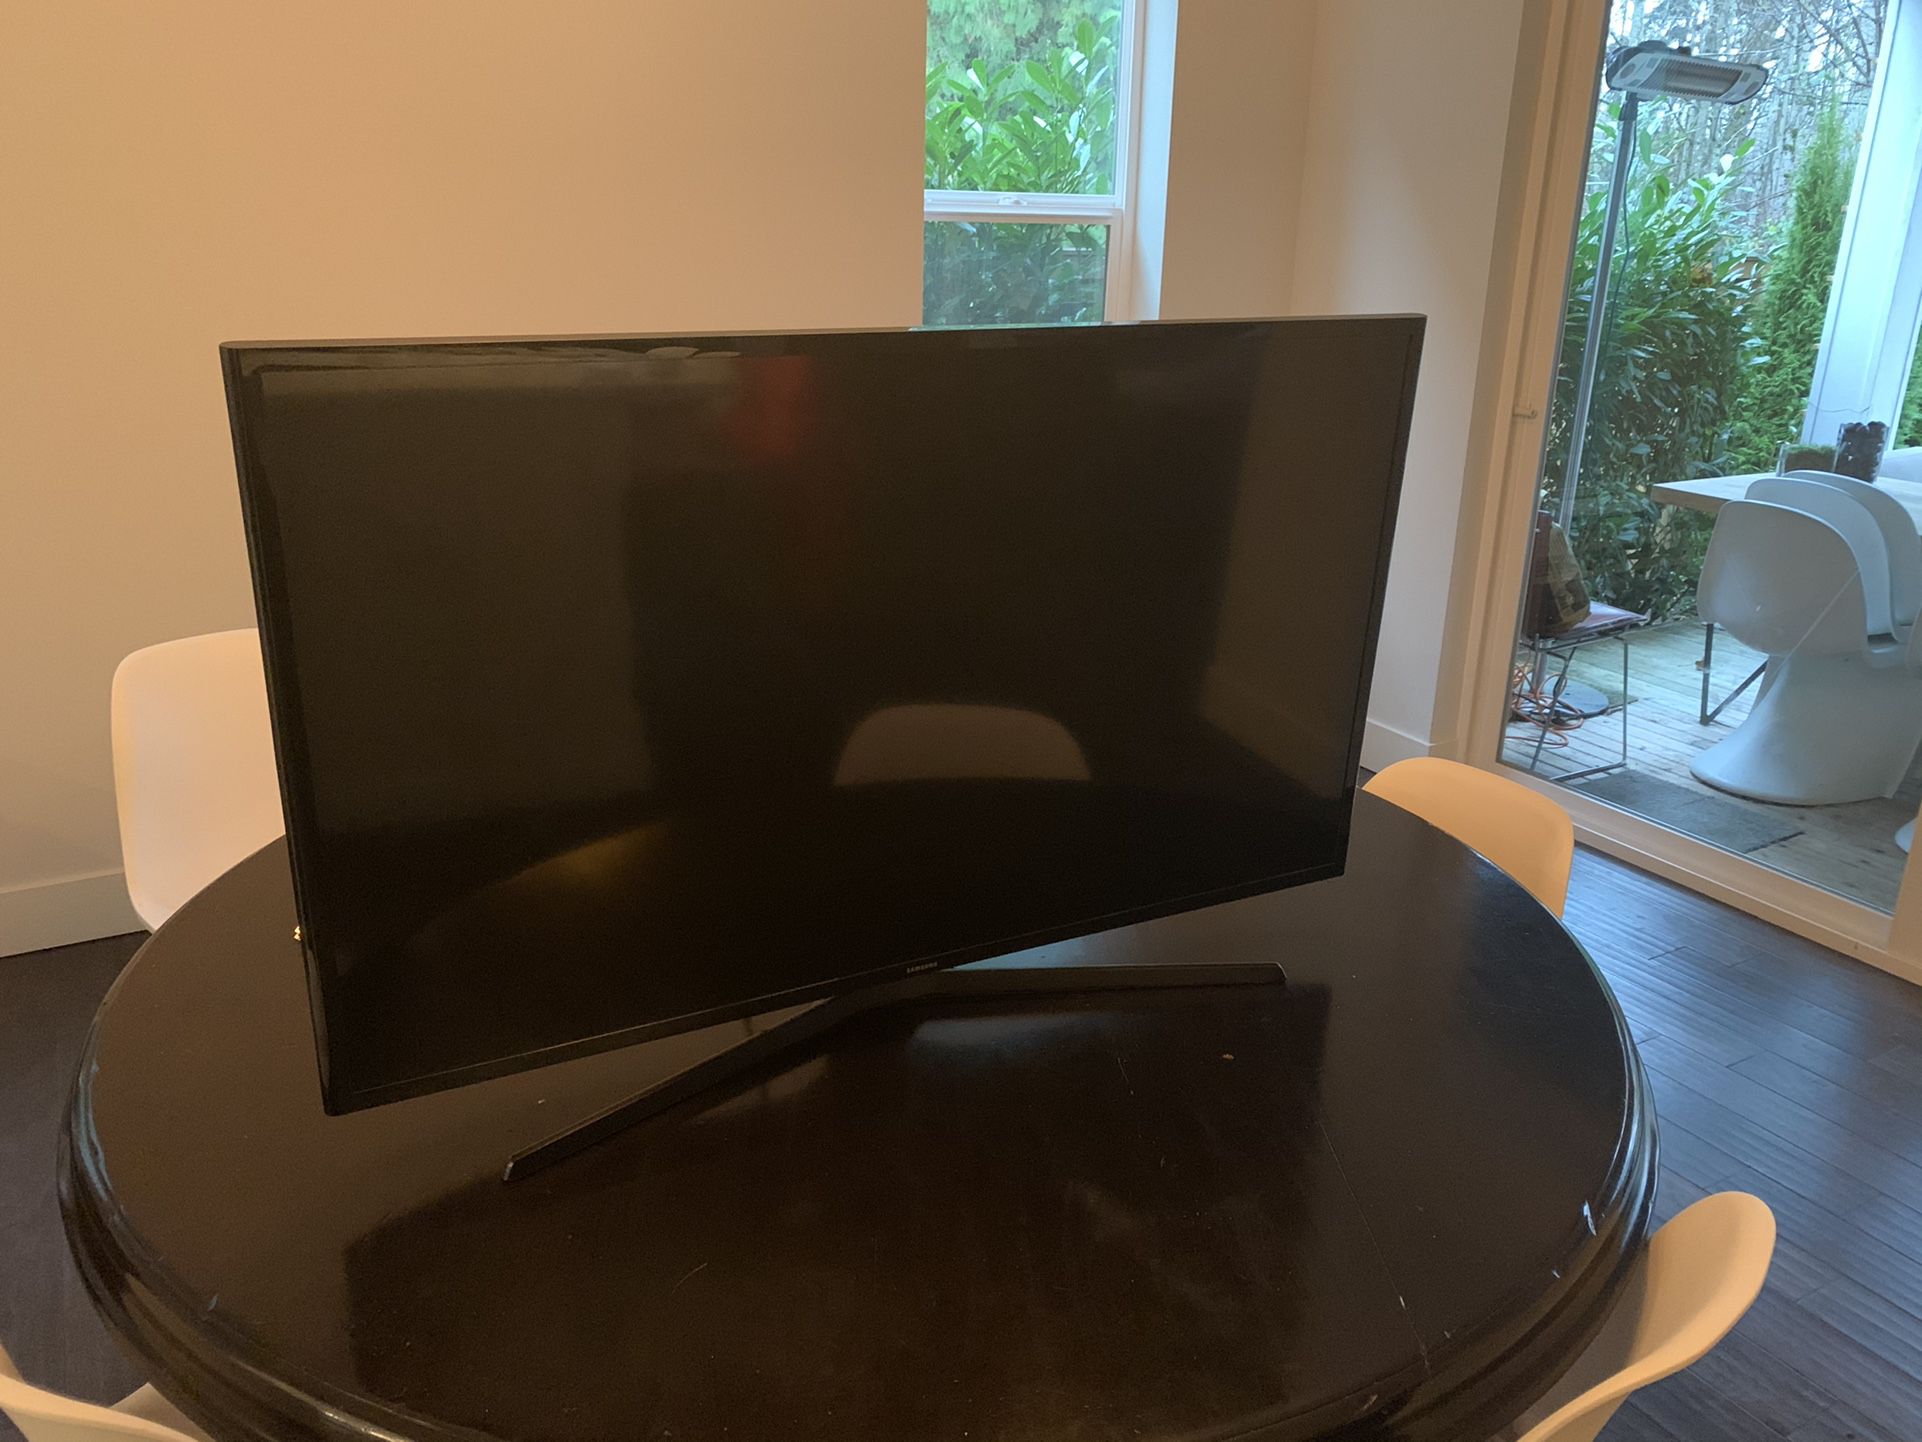 Samsung Flat Screen - 43” With New Wall Mount